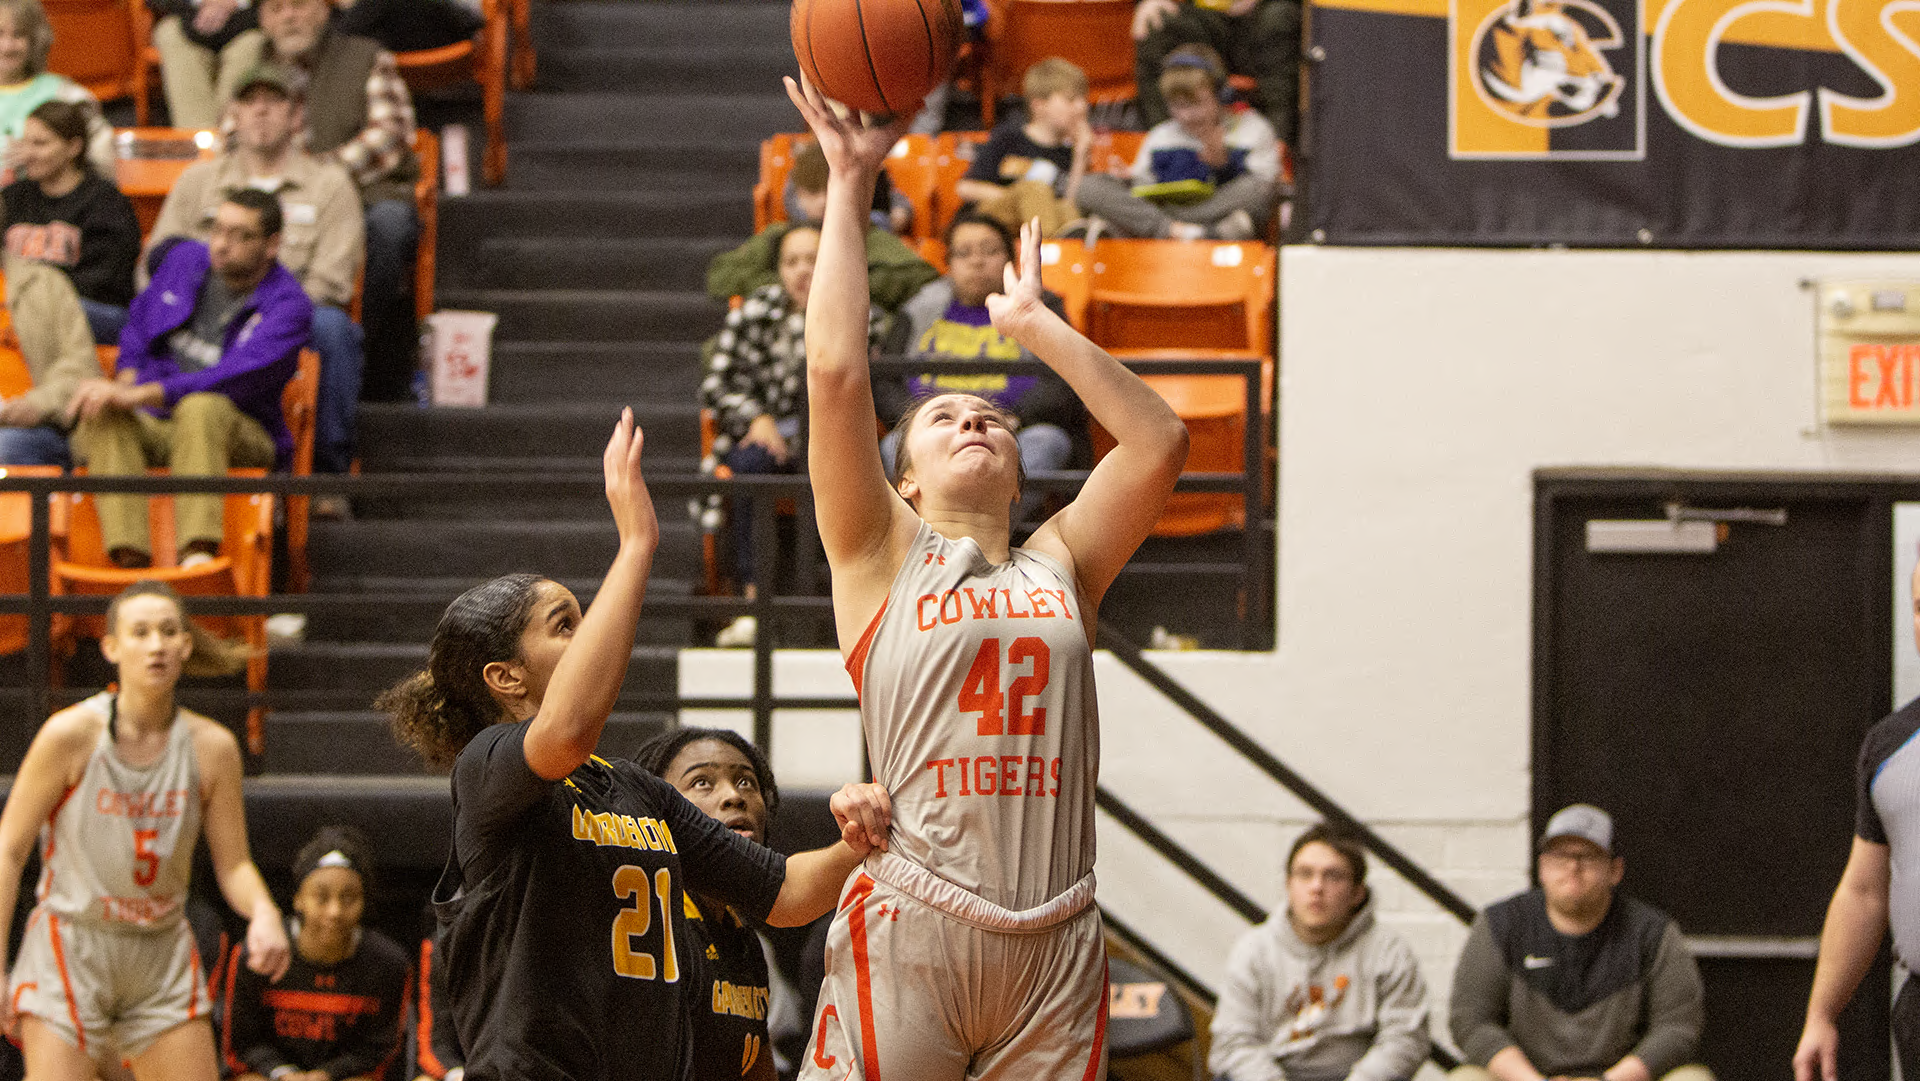 Lady Tigers rally from 18 points down to defeat Garden City 83-79